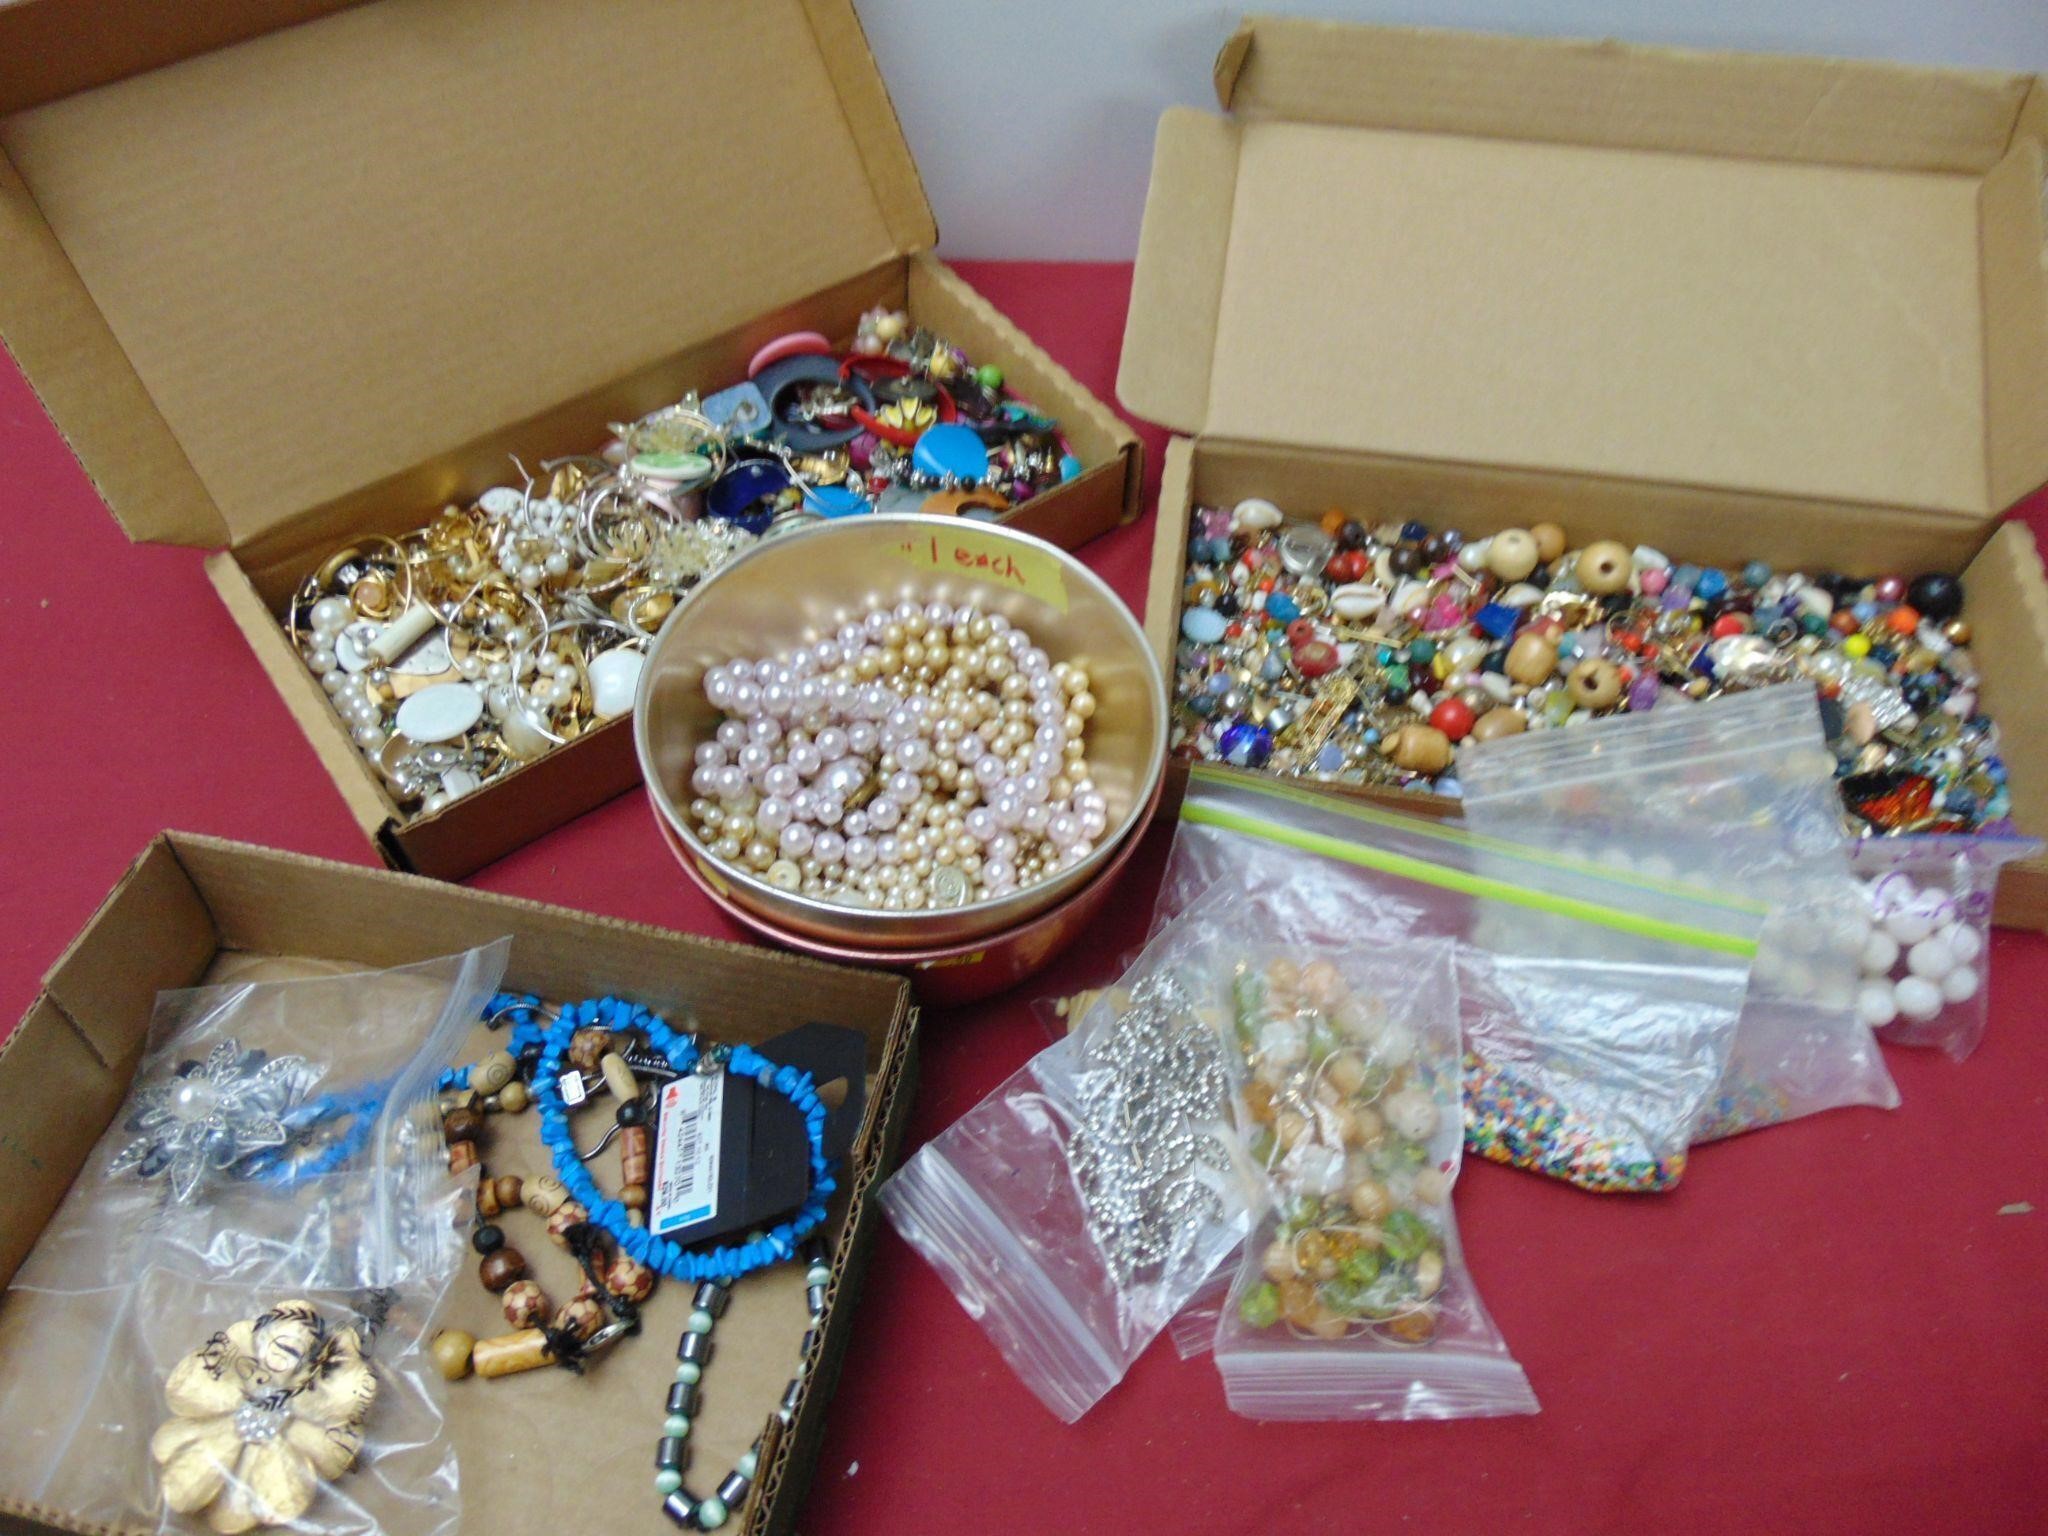 Beads, Jewelry Parts, and More Beads